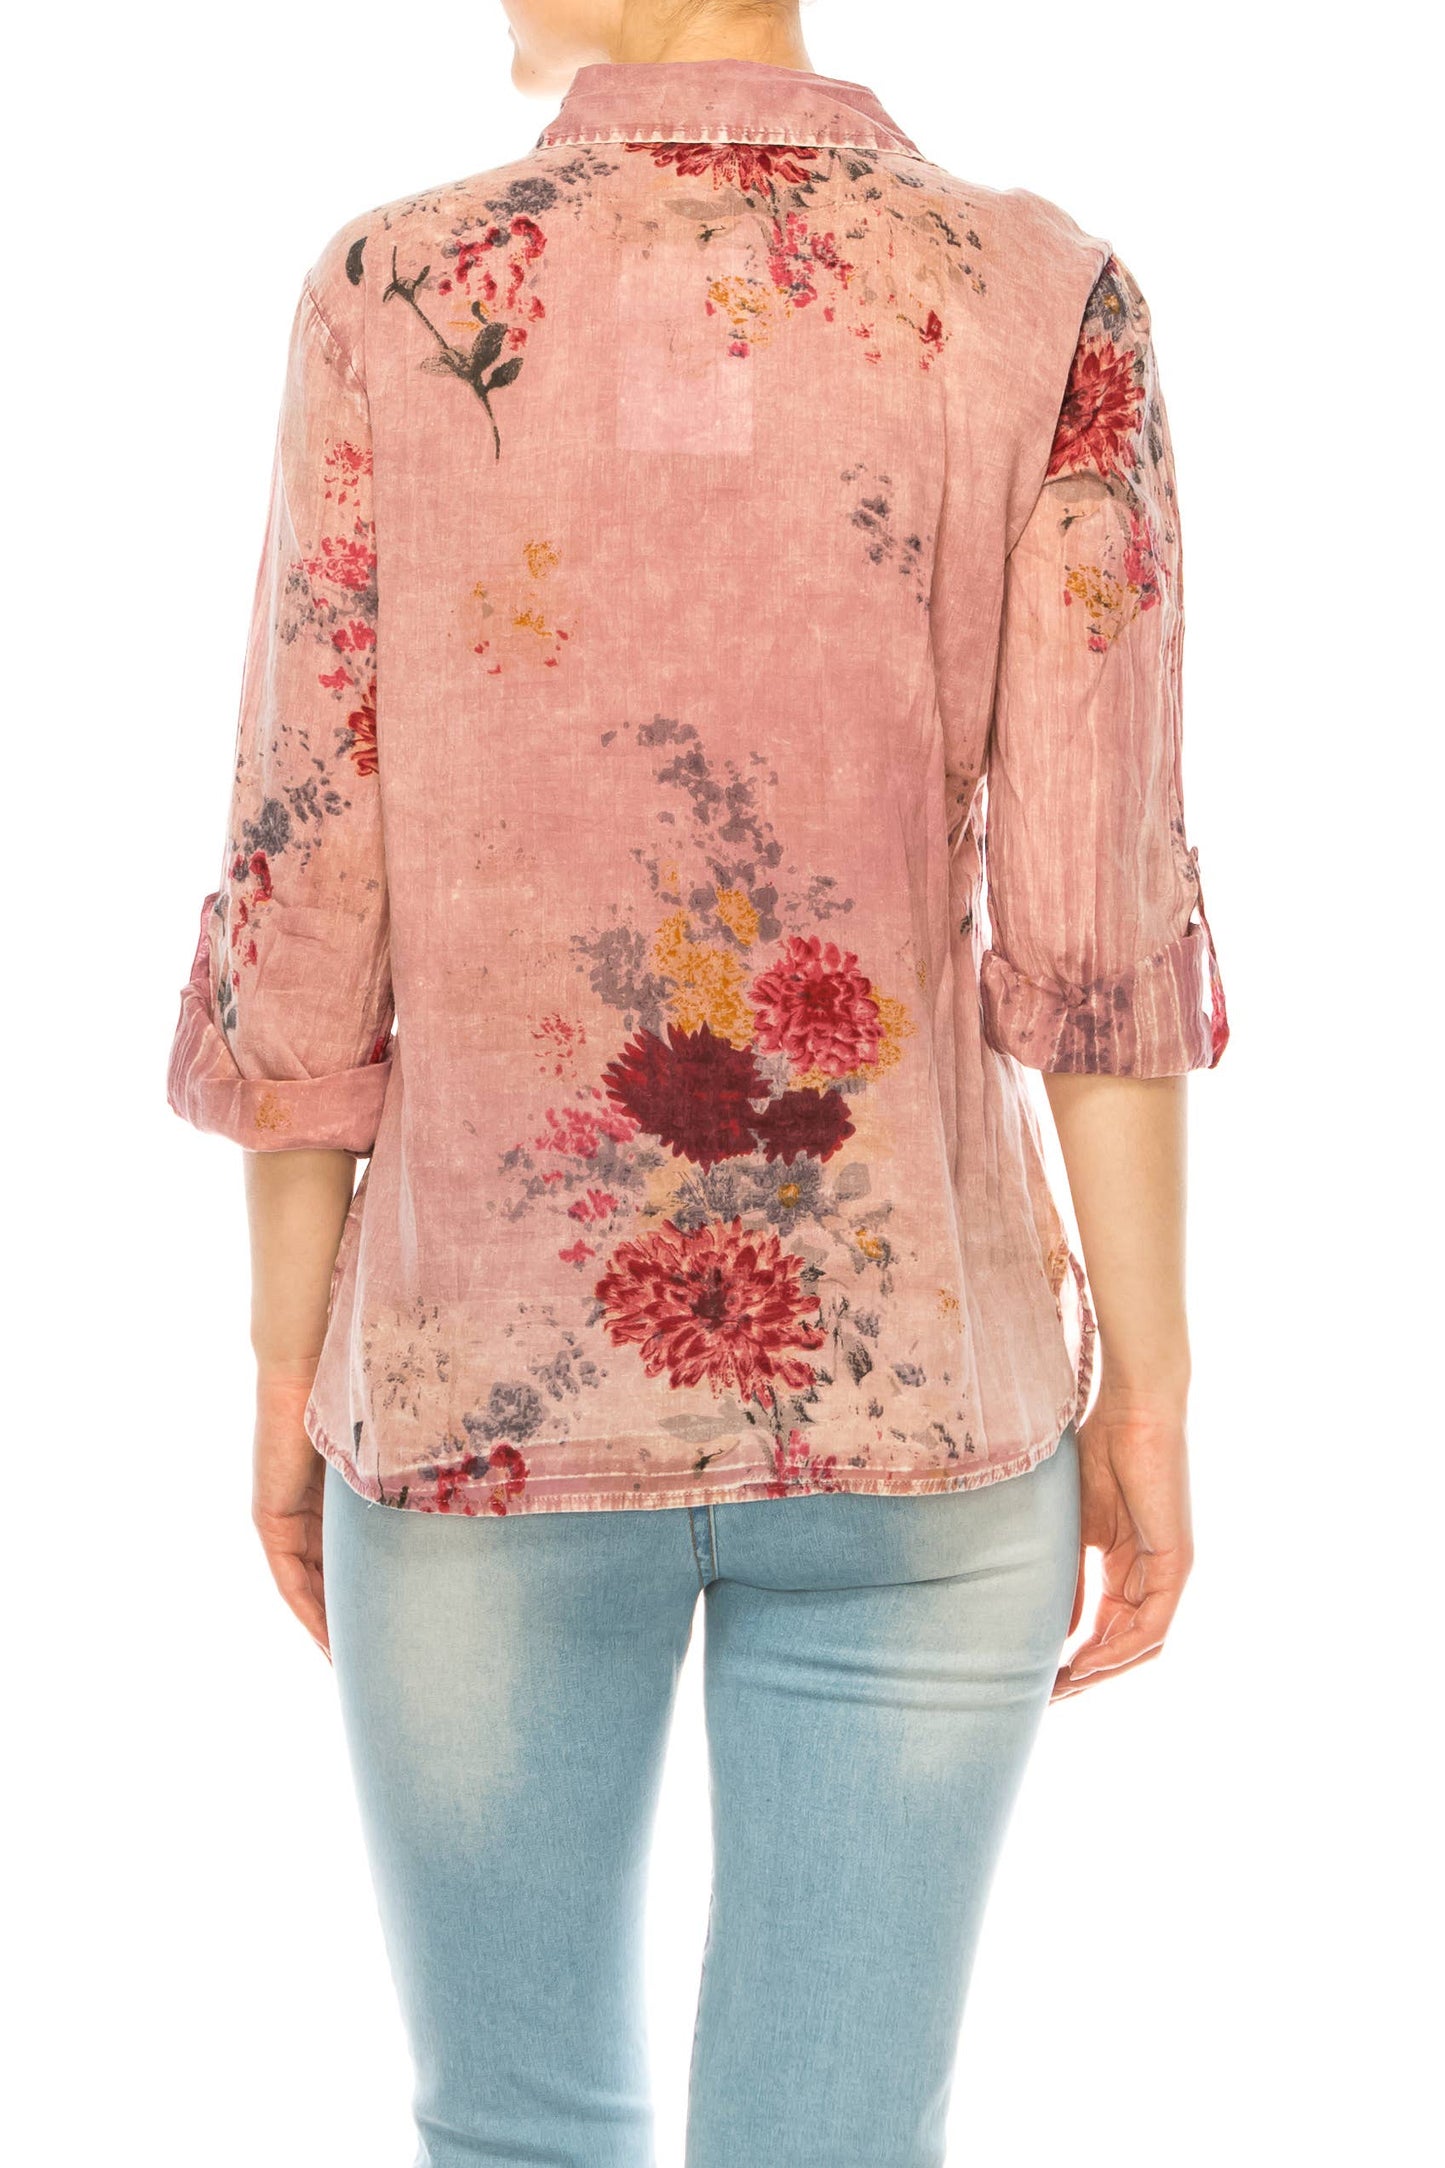 Vintage Pink Floral Printed Shirt with Embroidery